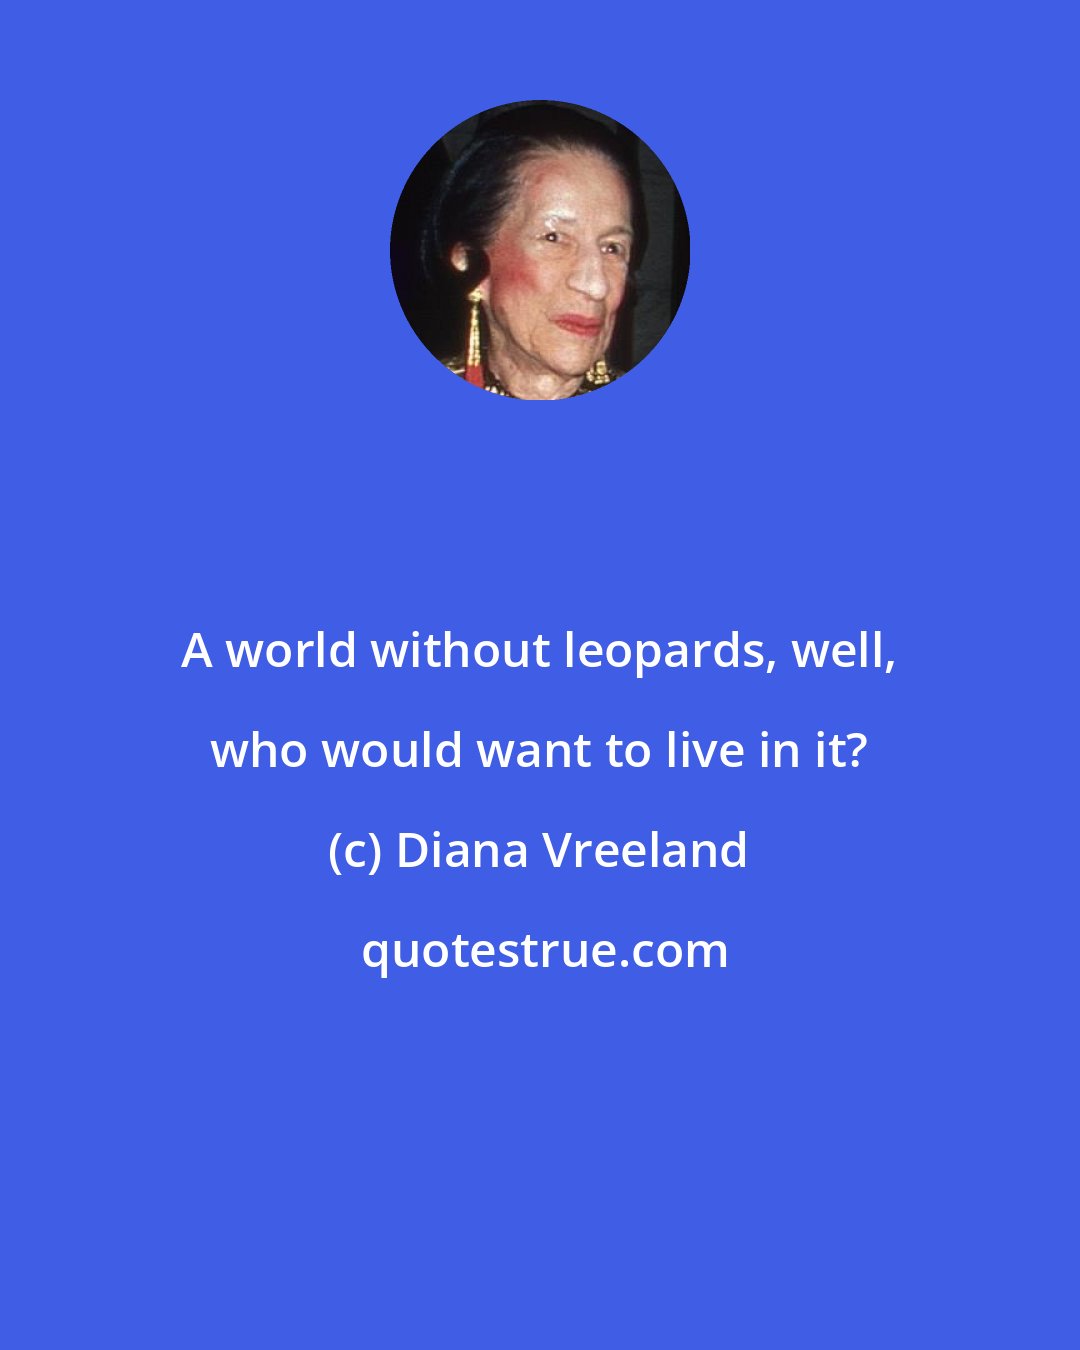 Diana Vreeland: A world without leopards, well, who would want to live in it?